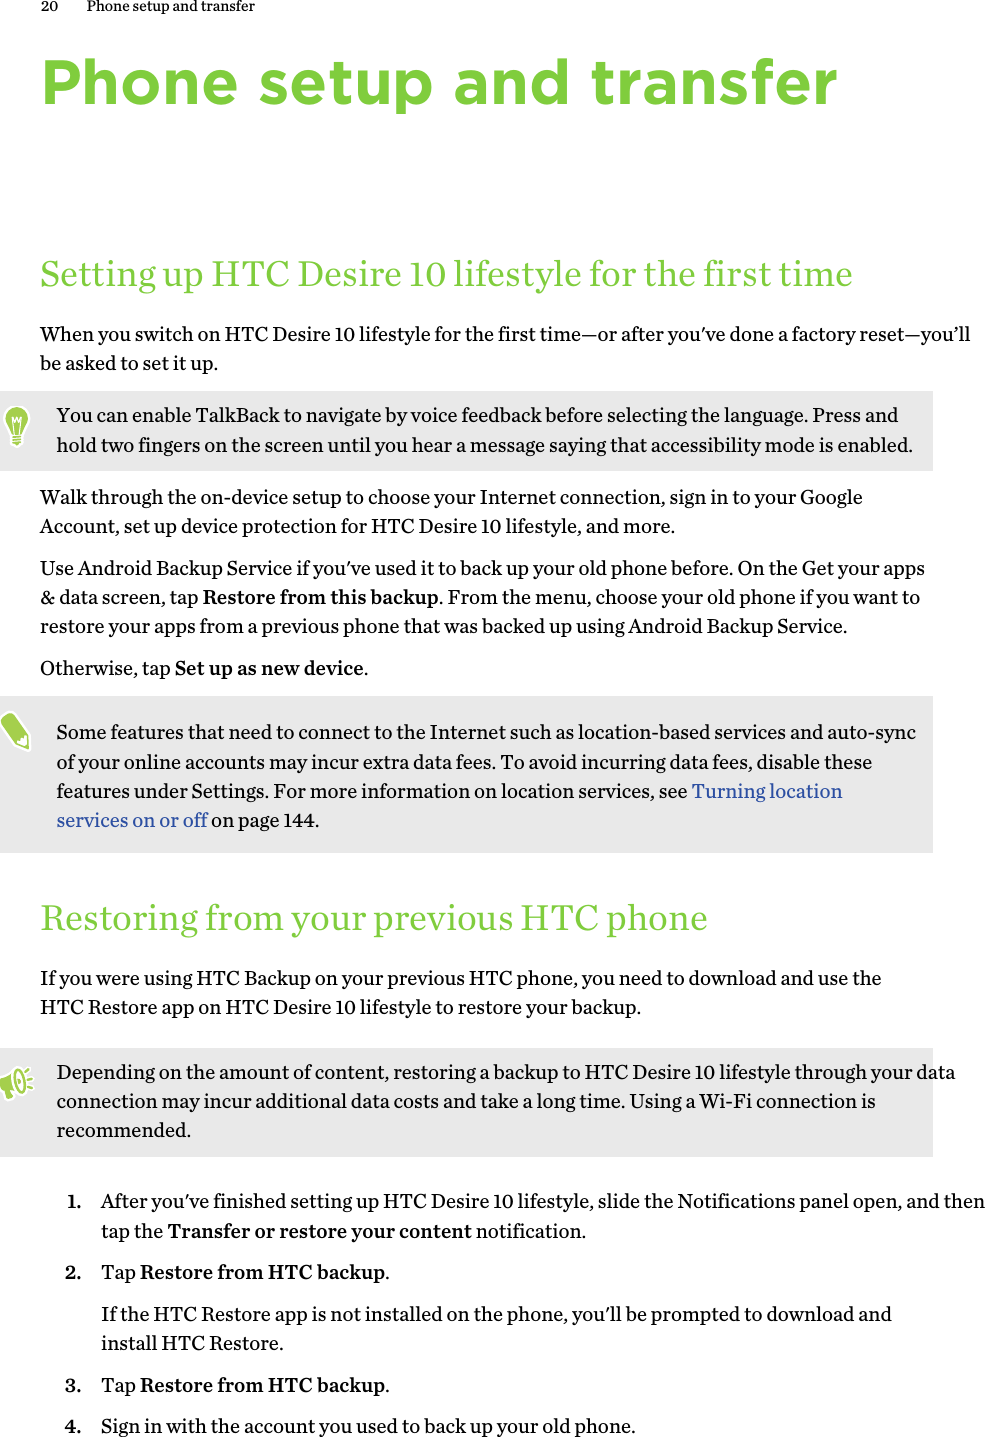 Phone setup and transferSetting up HTC Desire 10 lifestyle for the first timeWhen you switch on HTC Desire 10 lifestyle for the first time—or after you&apos;ve done a factory reset—you’ll be asked to set it up. You can enable TalkBack to navigate by voice feedback before selecting the language. Press and hold two fingers on the screen until you hear a message saying that accessibility mode is enabled.Walk through the on-device setup to choose your Internet connection, sign in to your Google Account, set up device protection for HTC Desire 10 lifestyle, and more. Use Android Backup Service if you&apos;ve used it to back up your old phone before. On the Get your apps &amp; data screen, tap Restore from this backup. From the menu, choose your old phone if you want to restore your apps from a previous phone that was backed up using Android Backup Service. Otherwise, tap Set up as new device.Some features that need to connect to the Internet such as location-based services and auto-sync of your online accounts may incur extra data fees. To avoid incurring data fees, disable these features under Settings. For more information on location services, see Turning location services on or off on page 144.Restoring from your previous HTC phoneIf you were using HTC Backup on your previous HTC phone, you need to download and use the HTC Restore app on HTC Desire 10 lifestyle to restore your backup. Depending on the amount of content, restoring a backup to HTC Desire 10 lifestyle through your data connection may incur additional data costs and take a long time. Using a Wi-Fi connection is recommended.1. After you&apos;ve finished setting up HTC Desire 10 lifestyle, slide the Notifications panel open, and then tap the Transfer or restore your content notification.2. Tap Restore from HTC backup.If the HTC Restore app is not installed on the phone, you&apos;ll be prompted to download and install HTC Restore.3. Tap Restore from HTC backup.4. Sign in with the account you used to back up your old phone.20 Phone setup and transfer